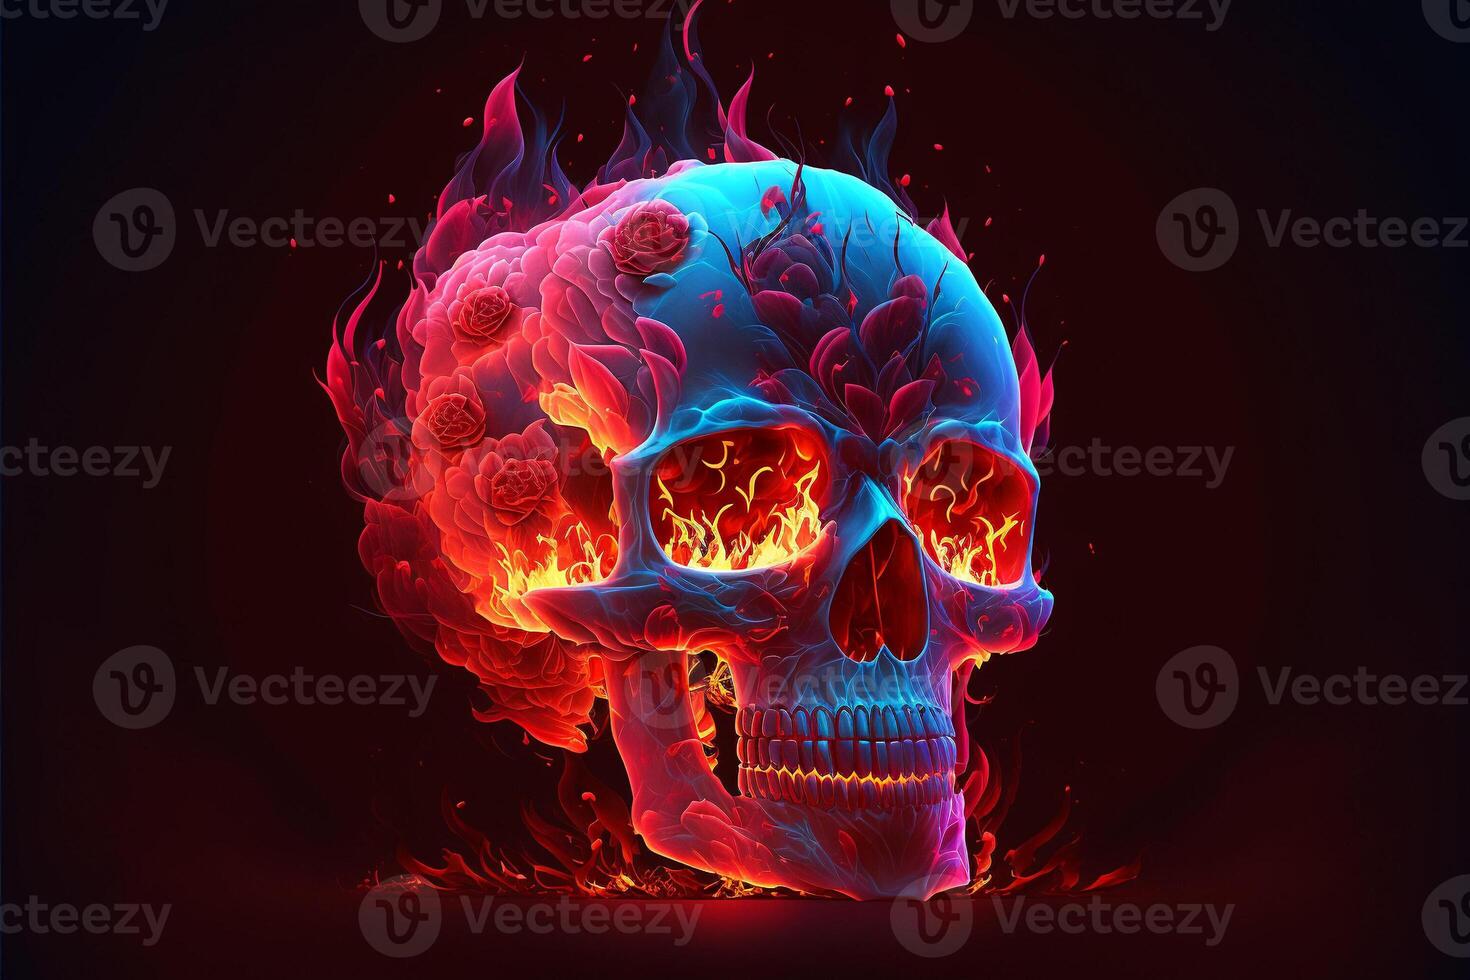 Scary love, Human skull and roses with fire flames Illustration for Valentine's Day or halloween, . photo